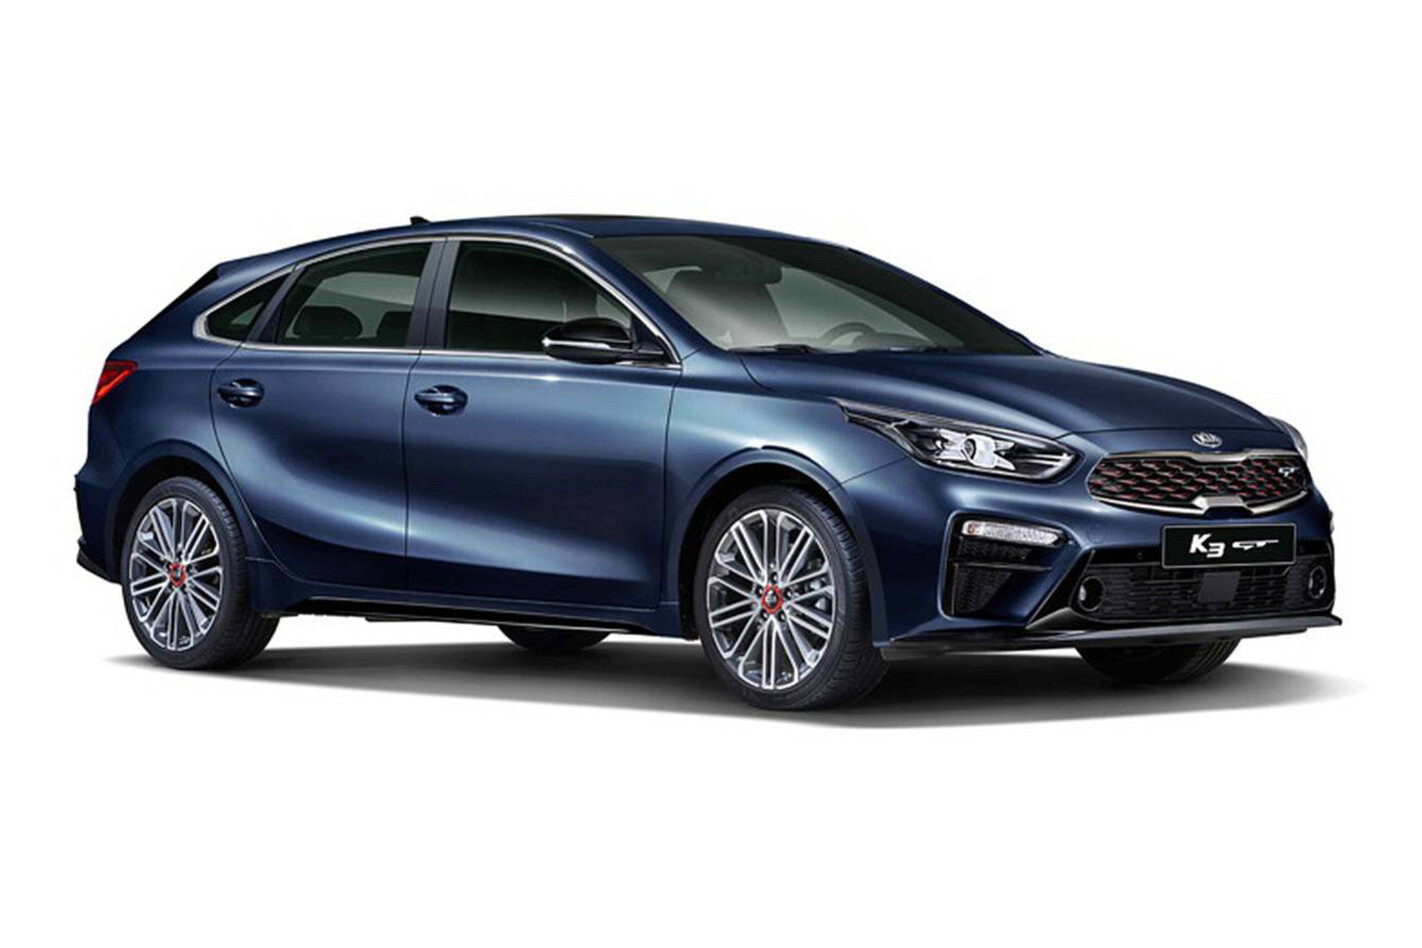 2019 Kia Cerato GT set for January launch with turbo power